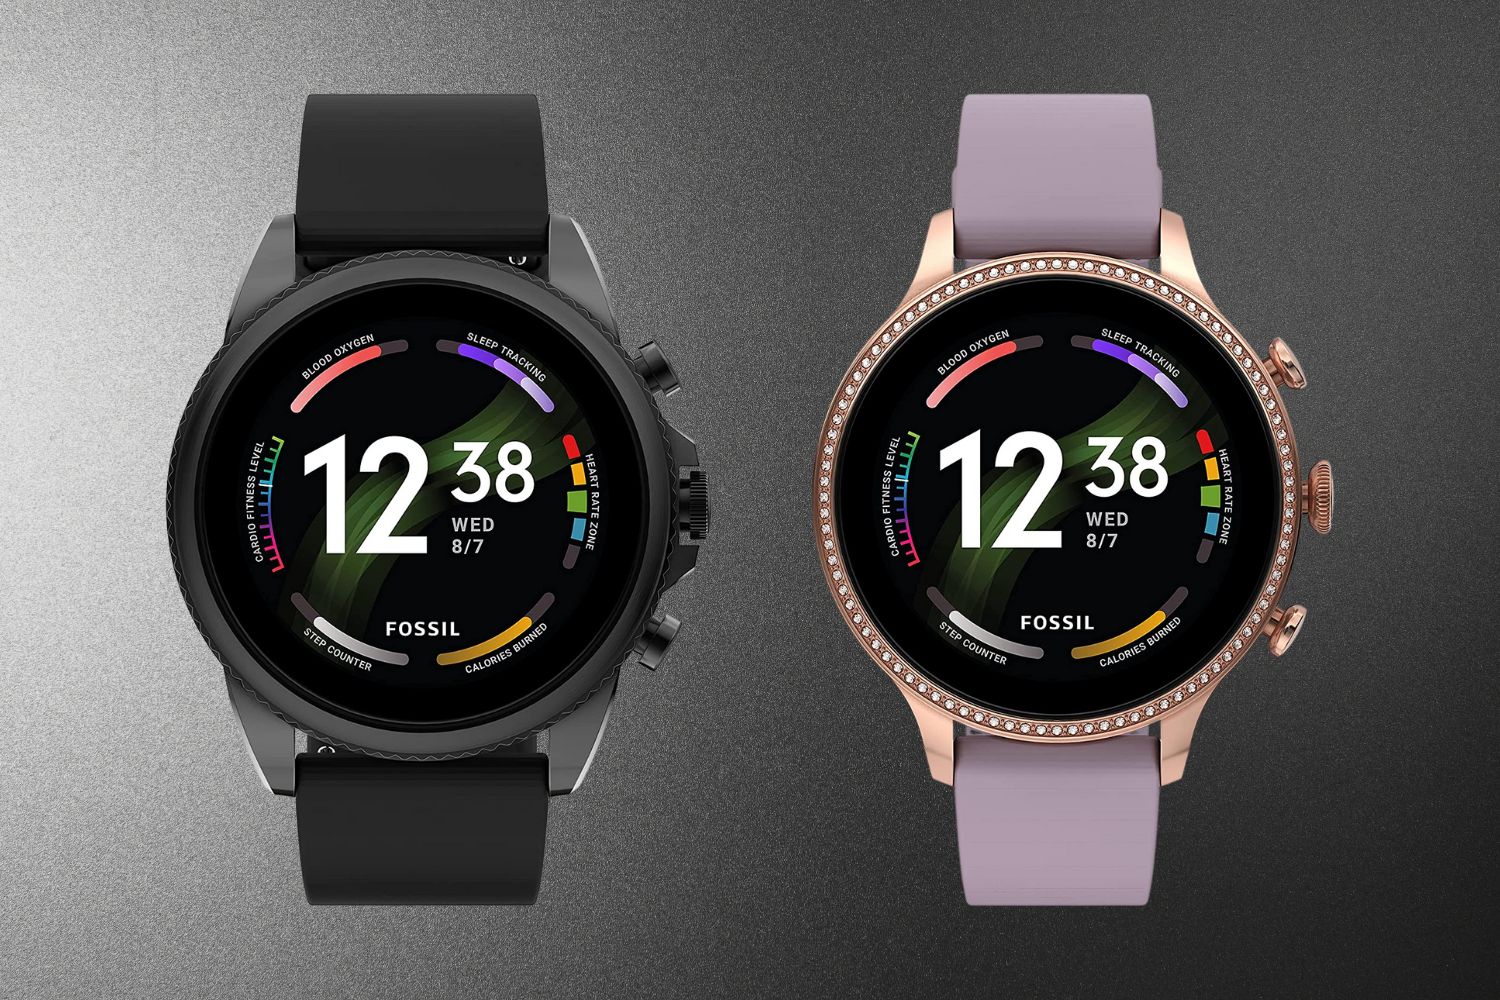 Fossil Smartwatches, early Amazon Black Friday 2022 deals